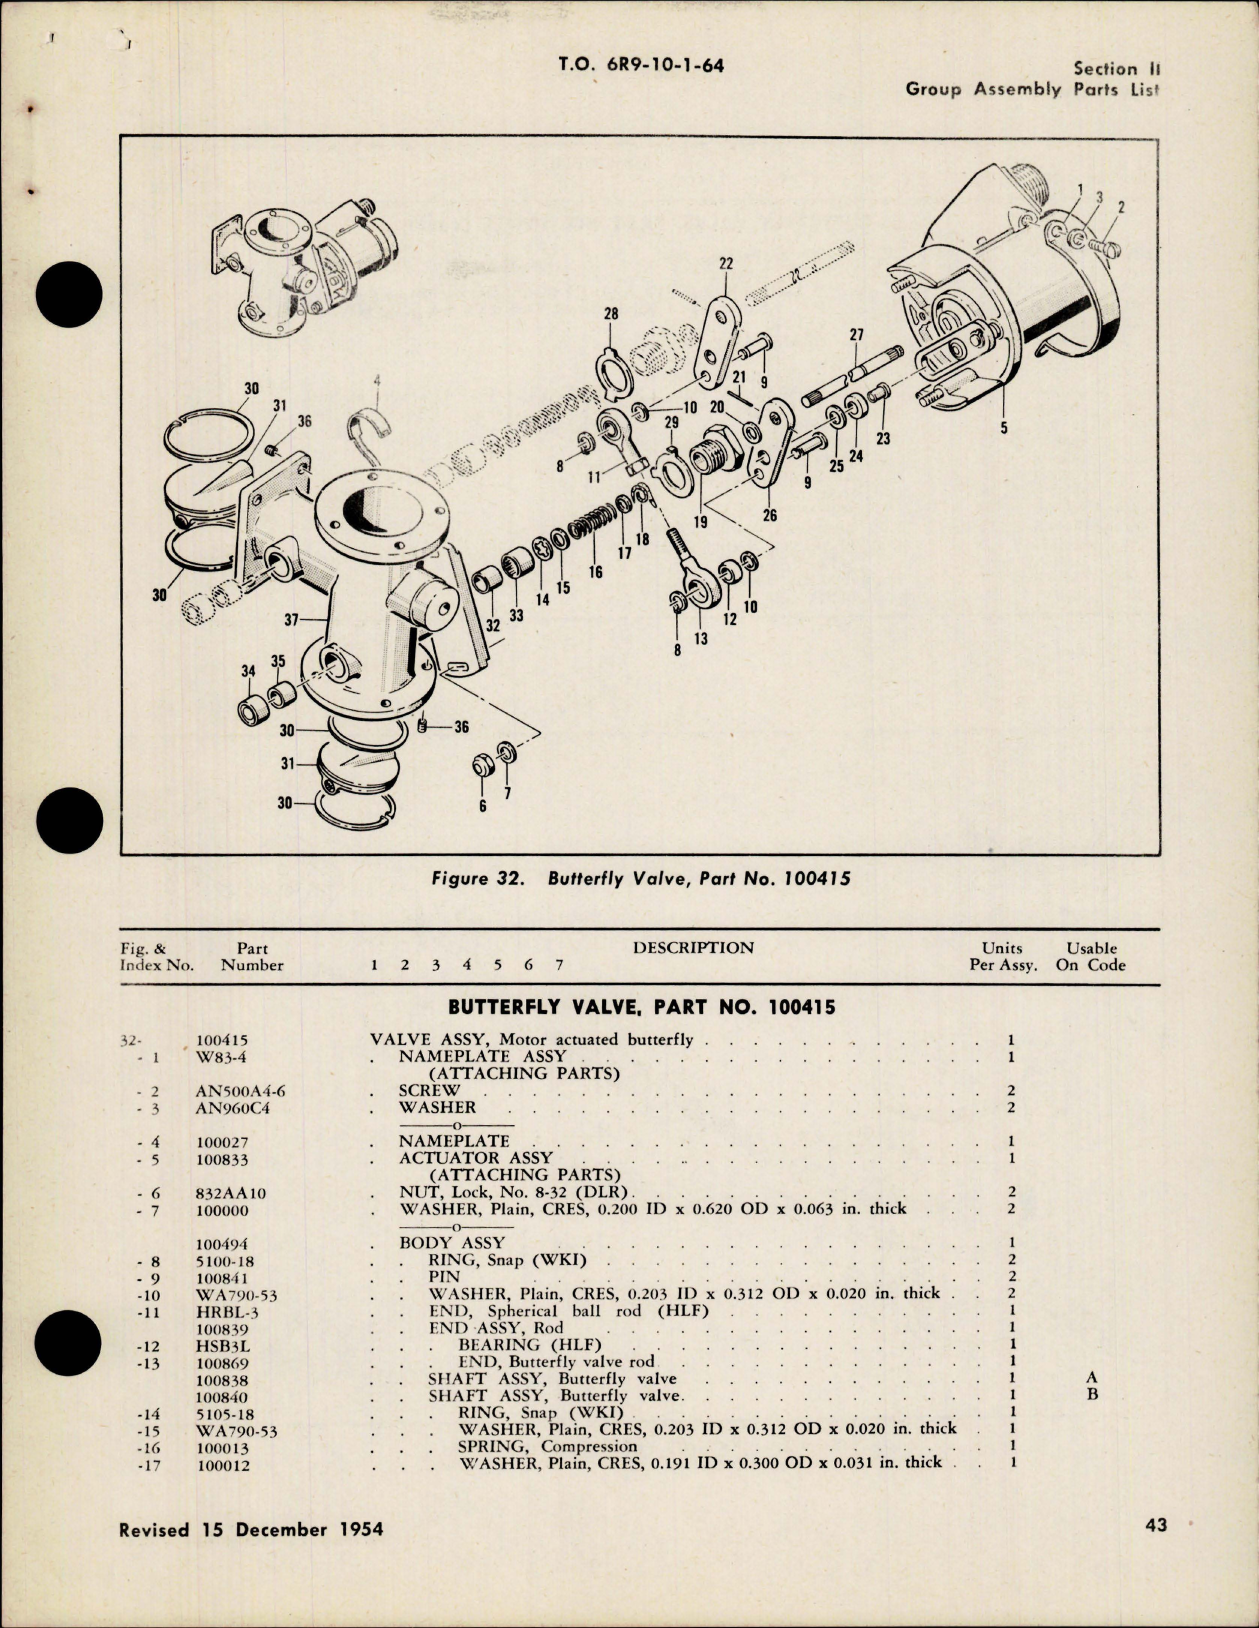 Sample page 7 from AirCorps Library document: Illustrated Parts Breakdown for Butterfly Valves 